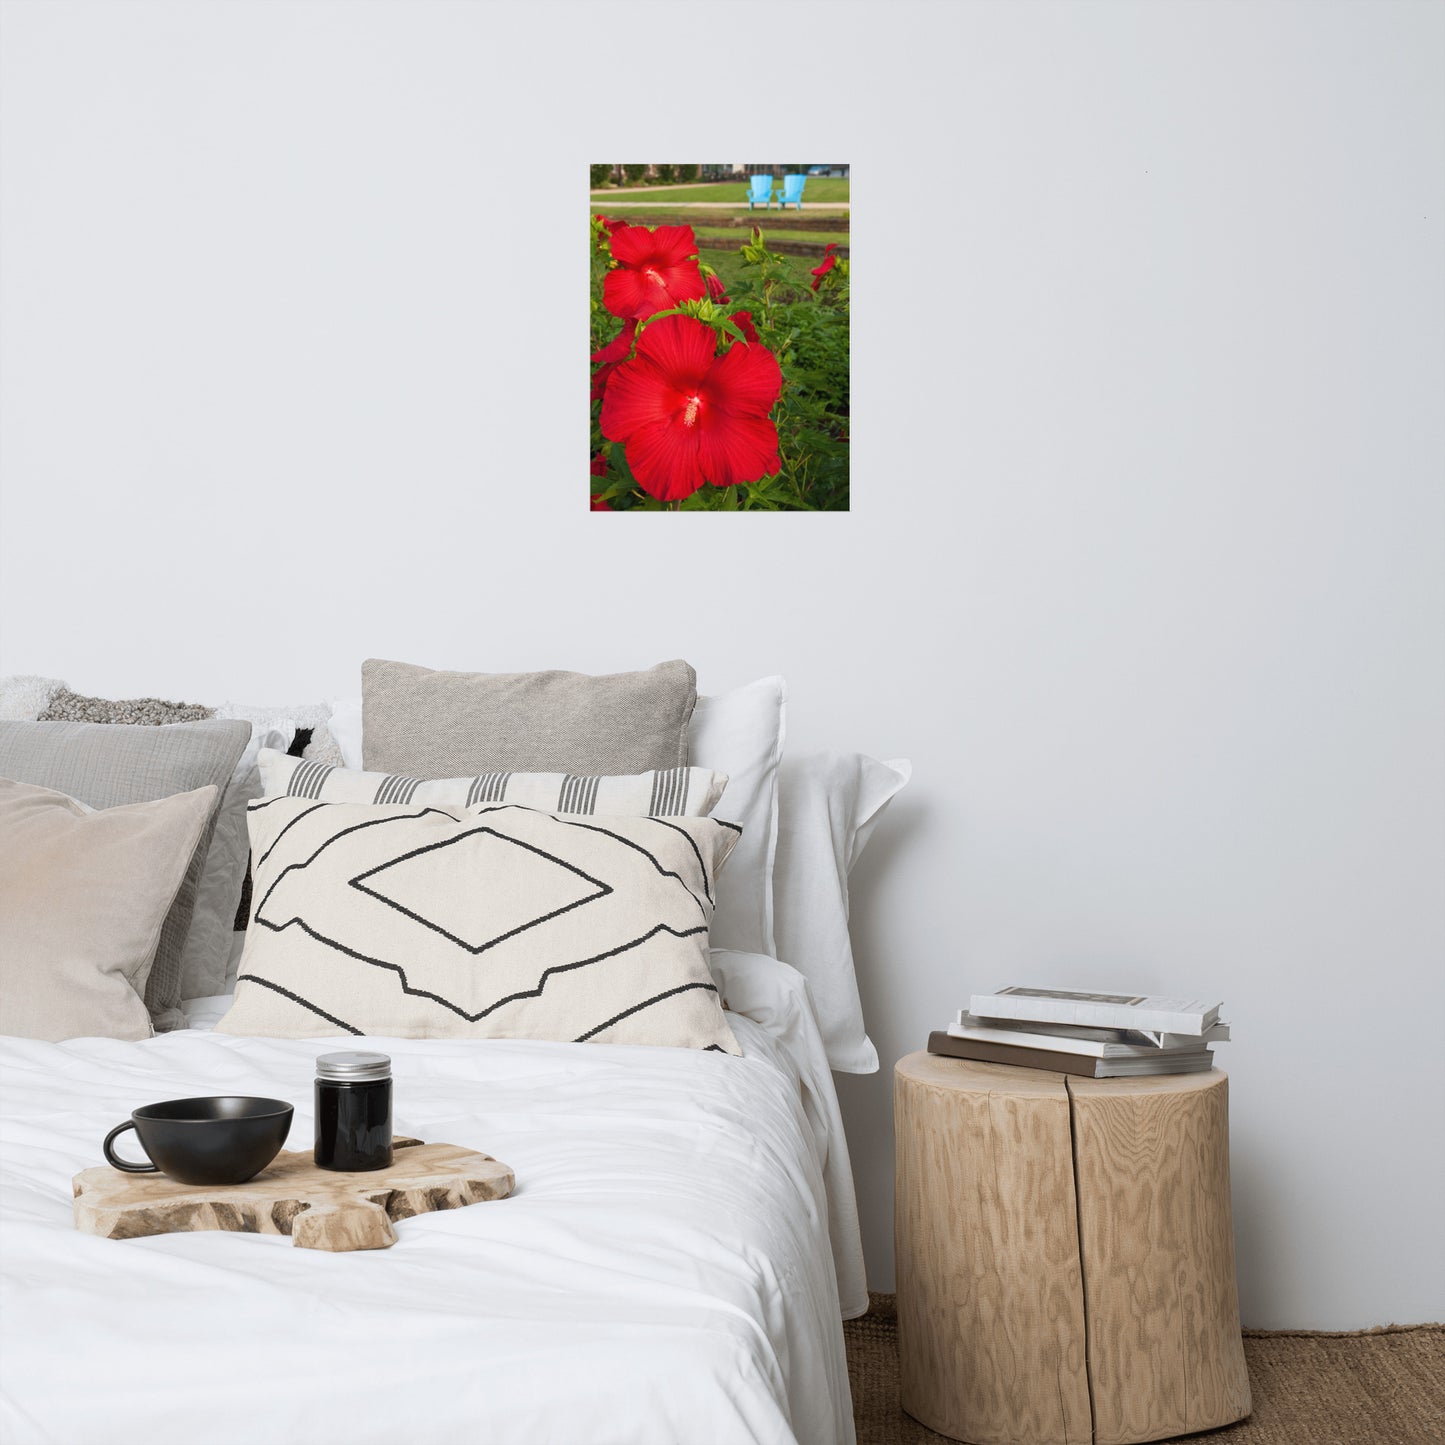 The Riverfront 2 Floral Nature Photo Loose Unframed Wall Art Prints